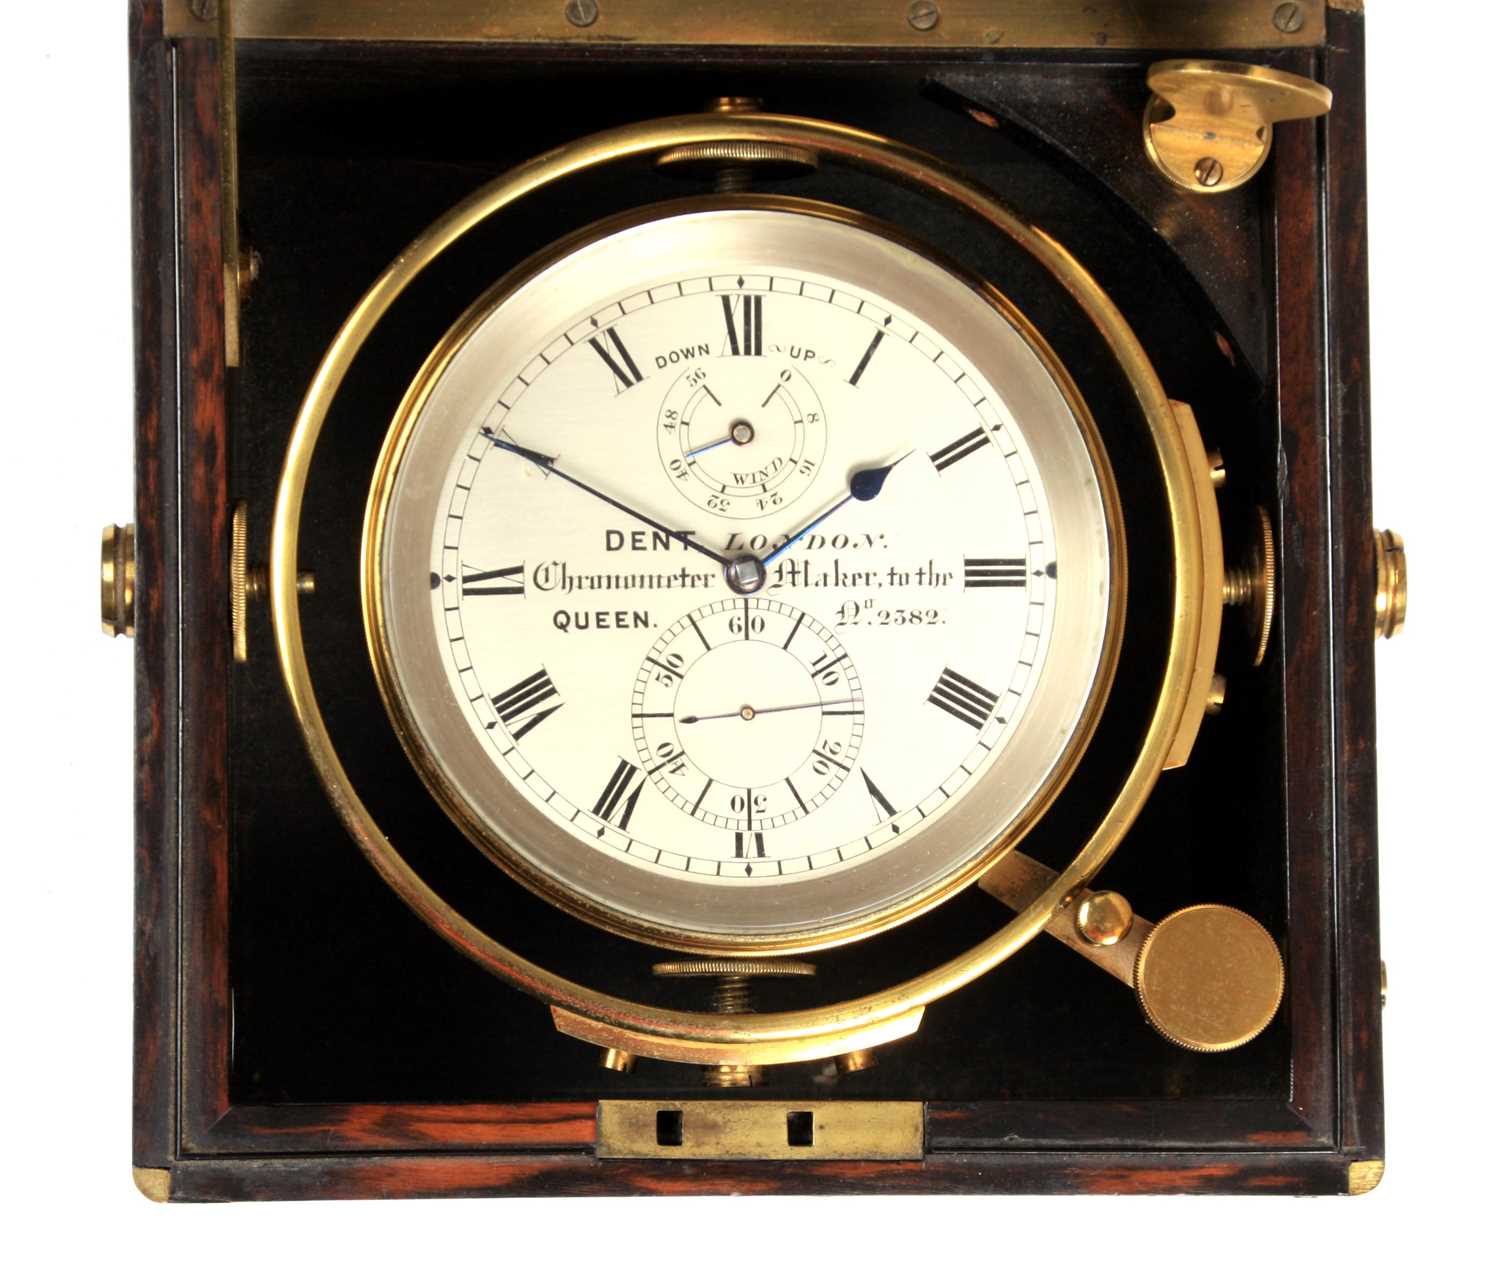 Lot 893 - DENT, LONDON CHRONOMETER MAKER TO THE QUEEN No....